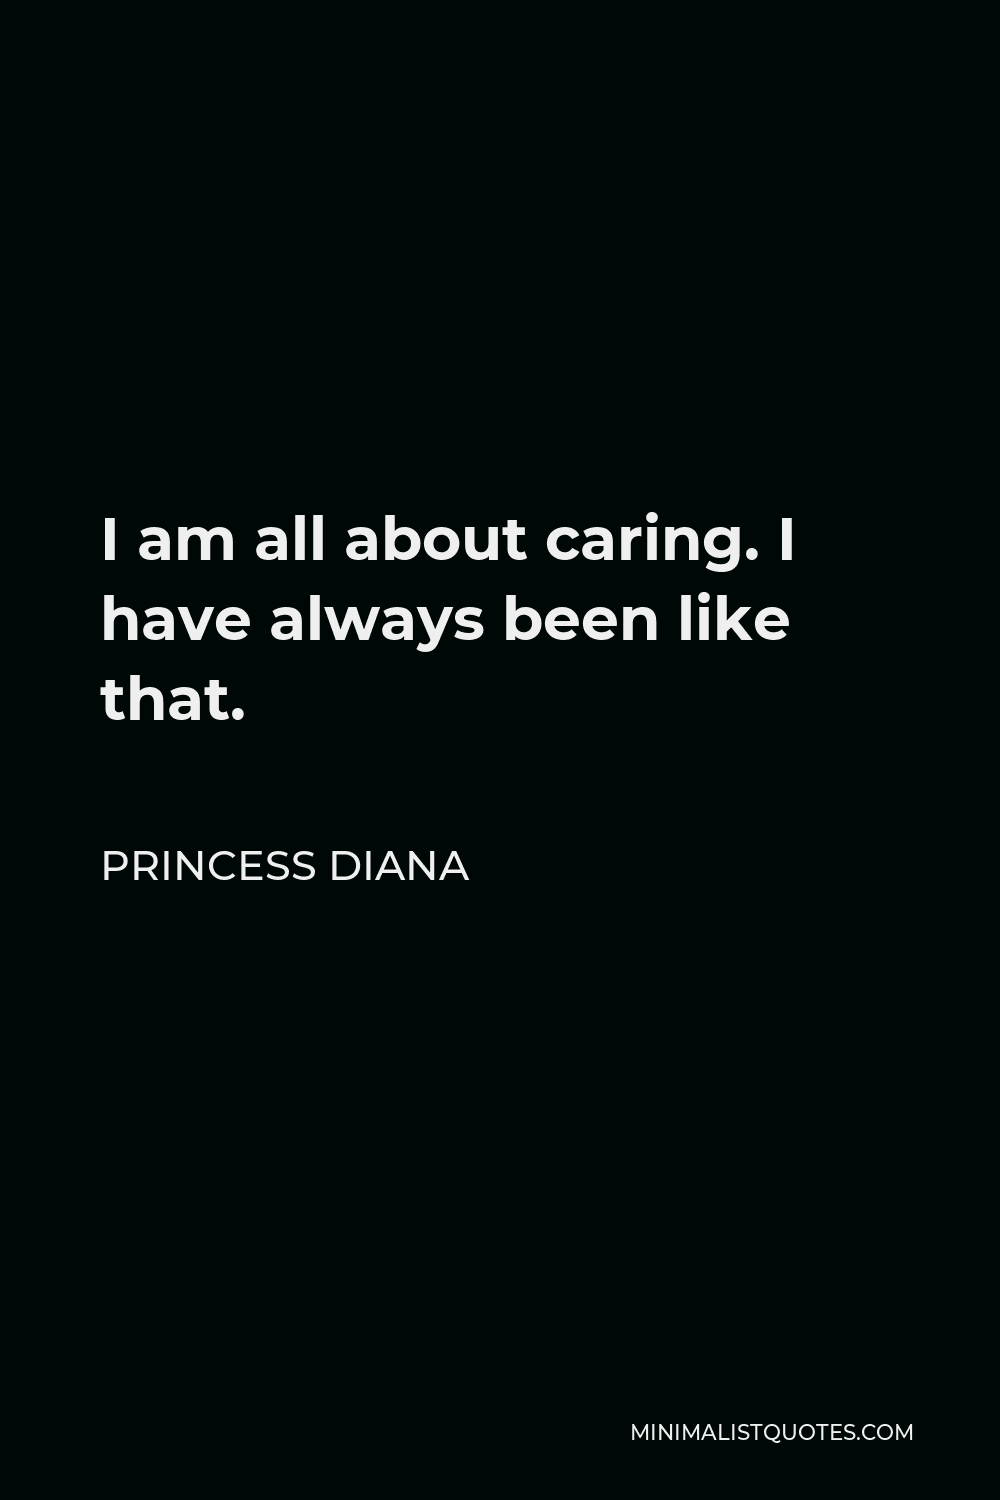 Princess Diana Quote - I am all about caring. I have always been like that.